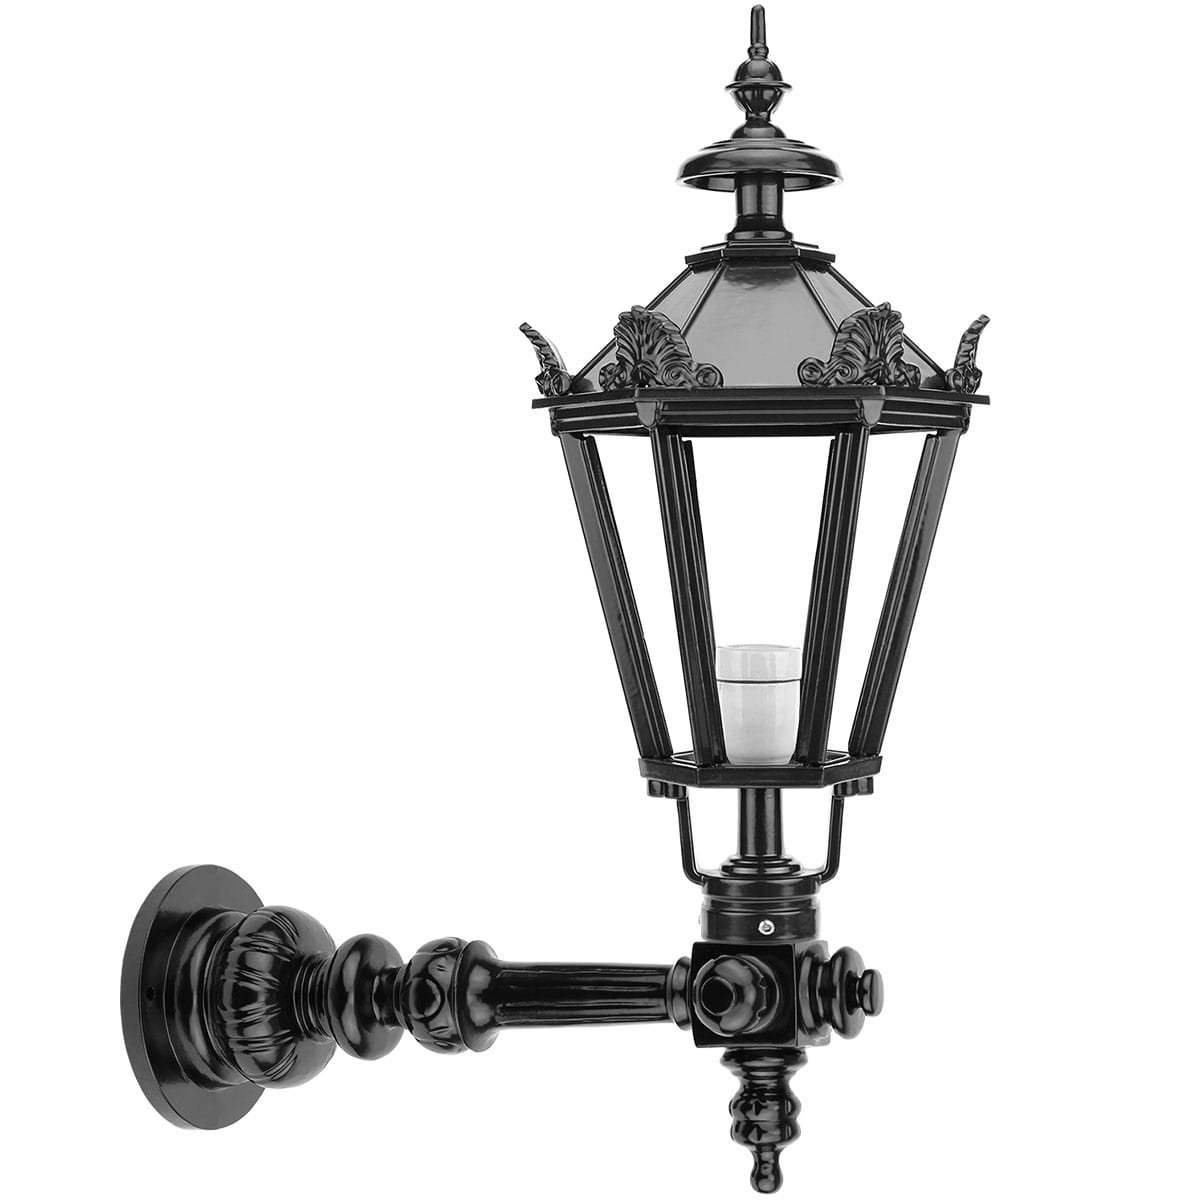 Wall lamp Dronten with crowns - 60 cm